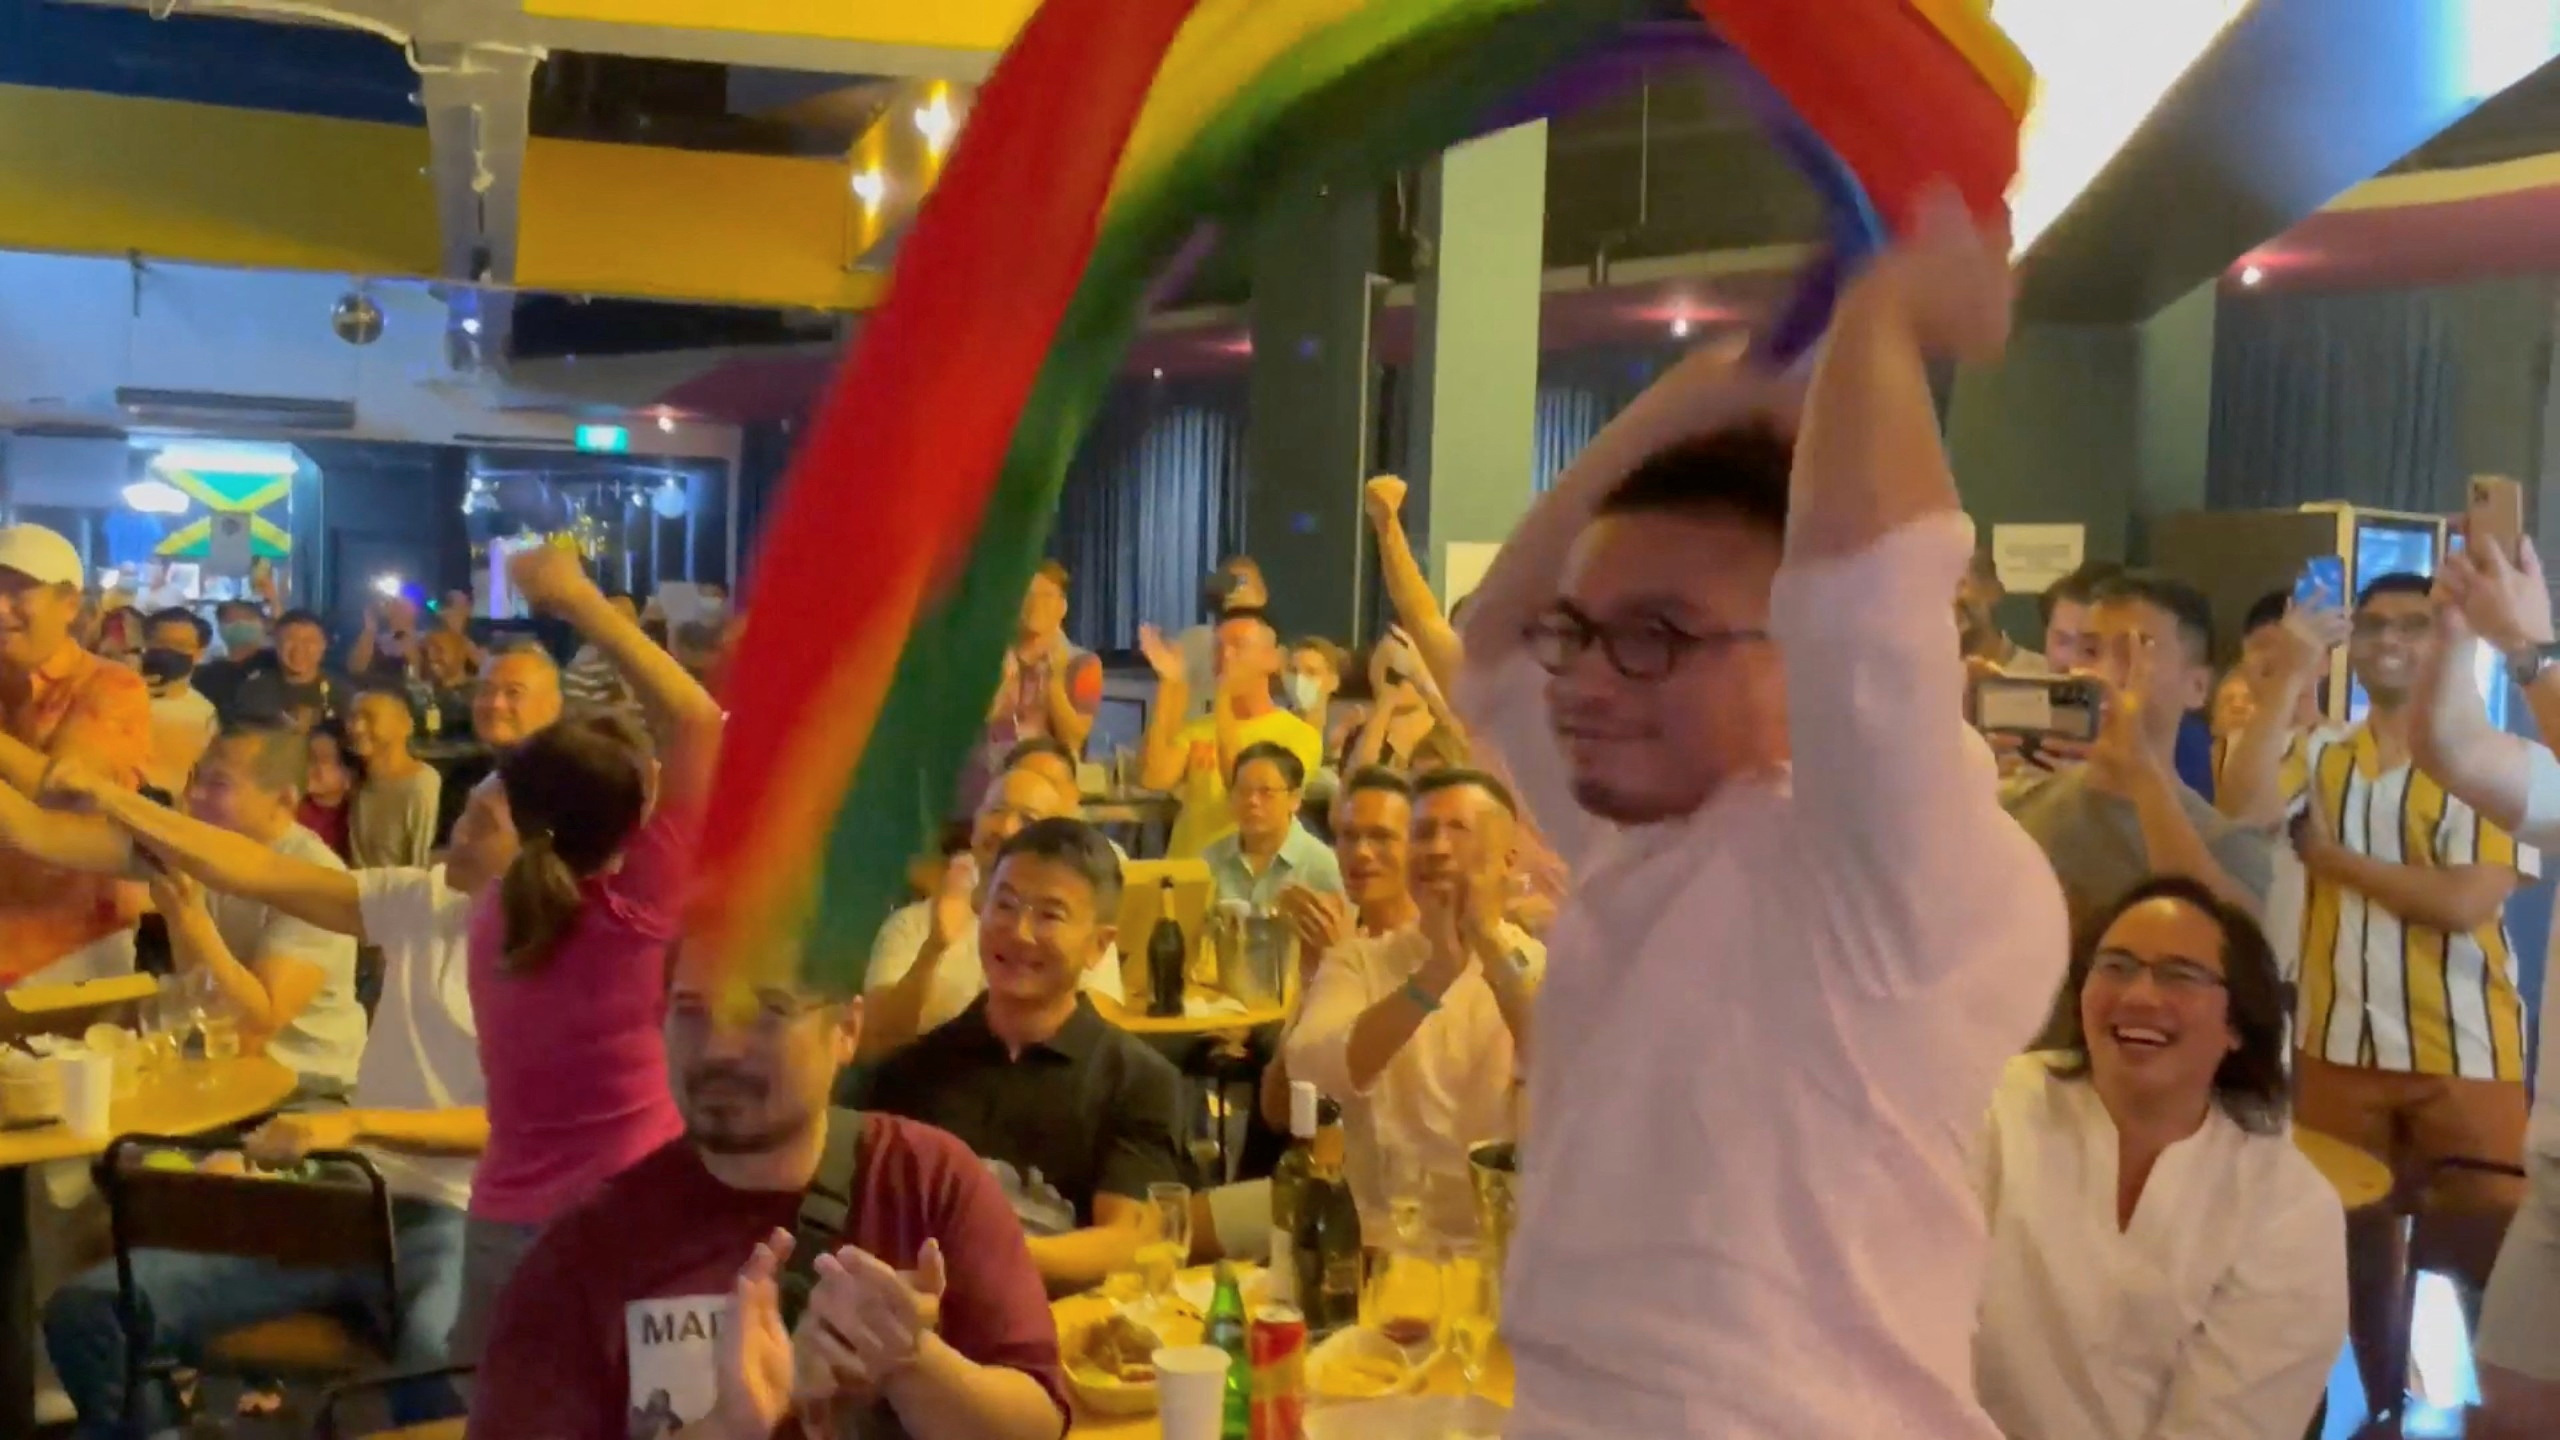 People react as Singapore's Prime Minister Lee Hsien Loong announces that Singapore will decriminalise gay sex